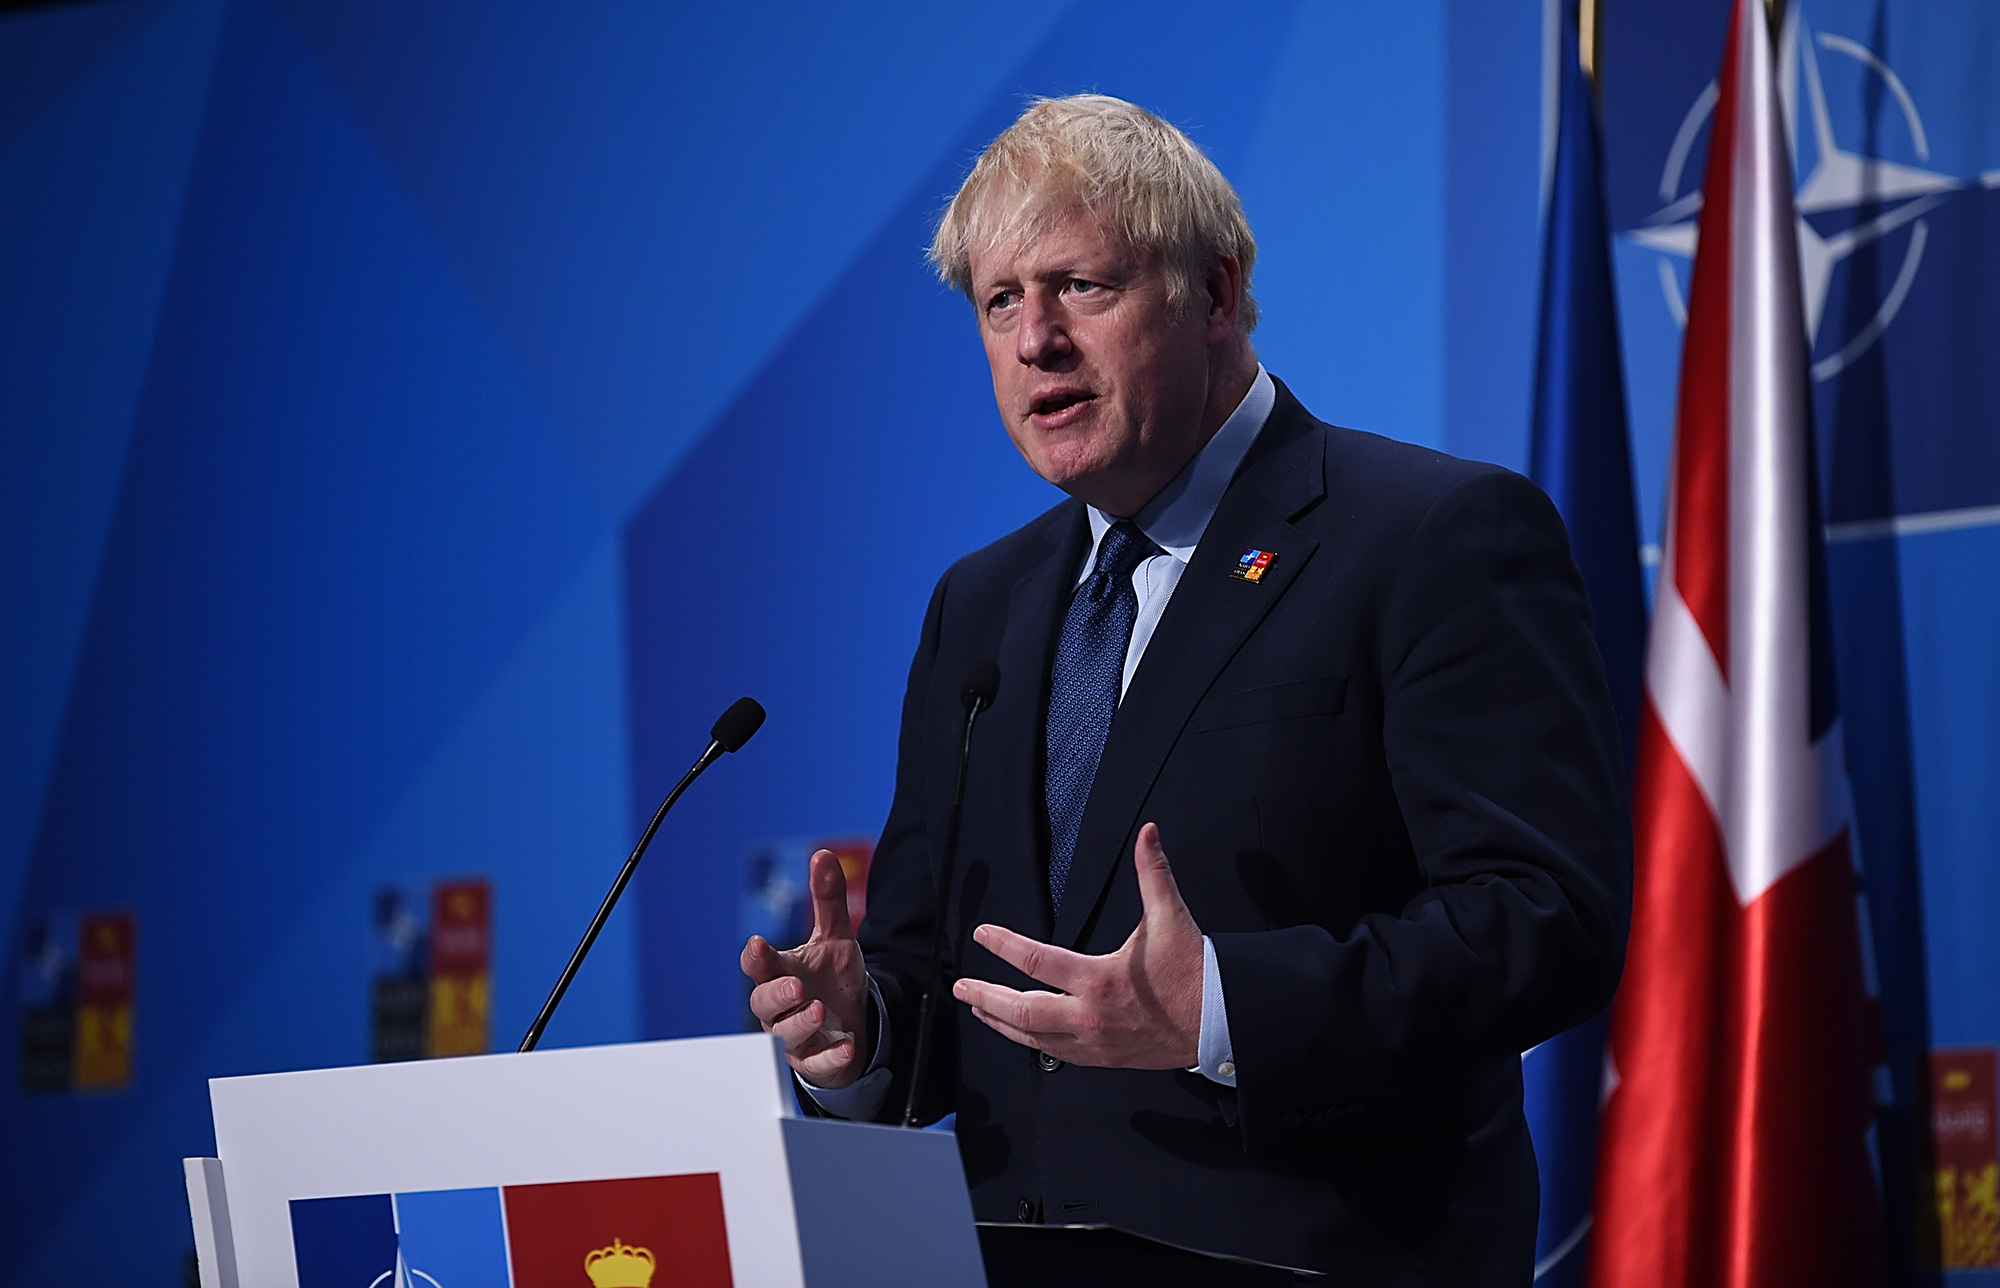 UK Prime Minister Boris Johnson holds a press conference at the NATO Summit in Madrid, Spain, on June 30.